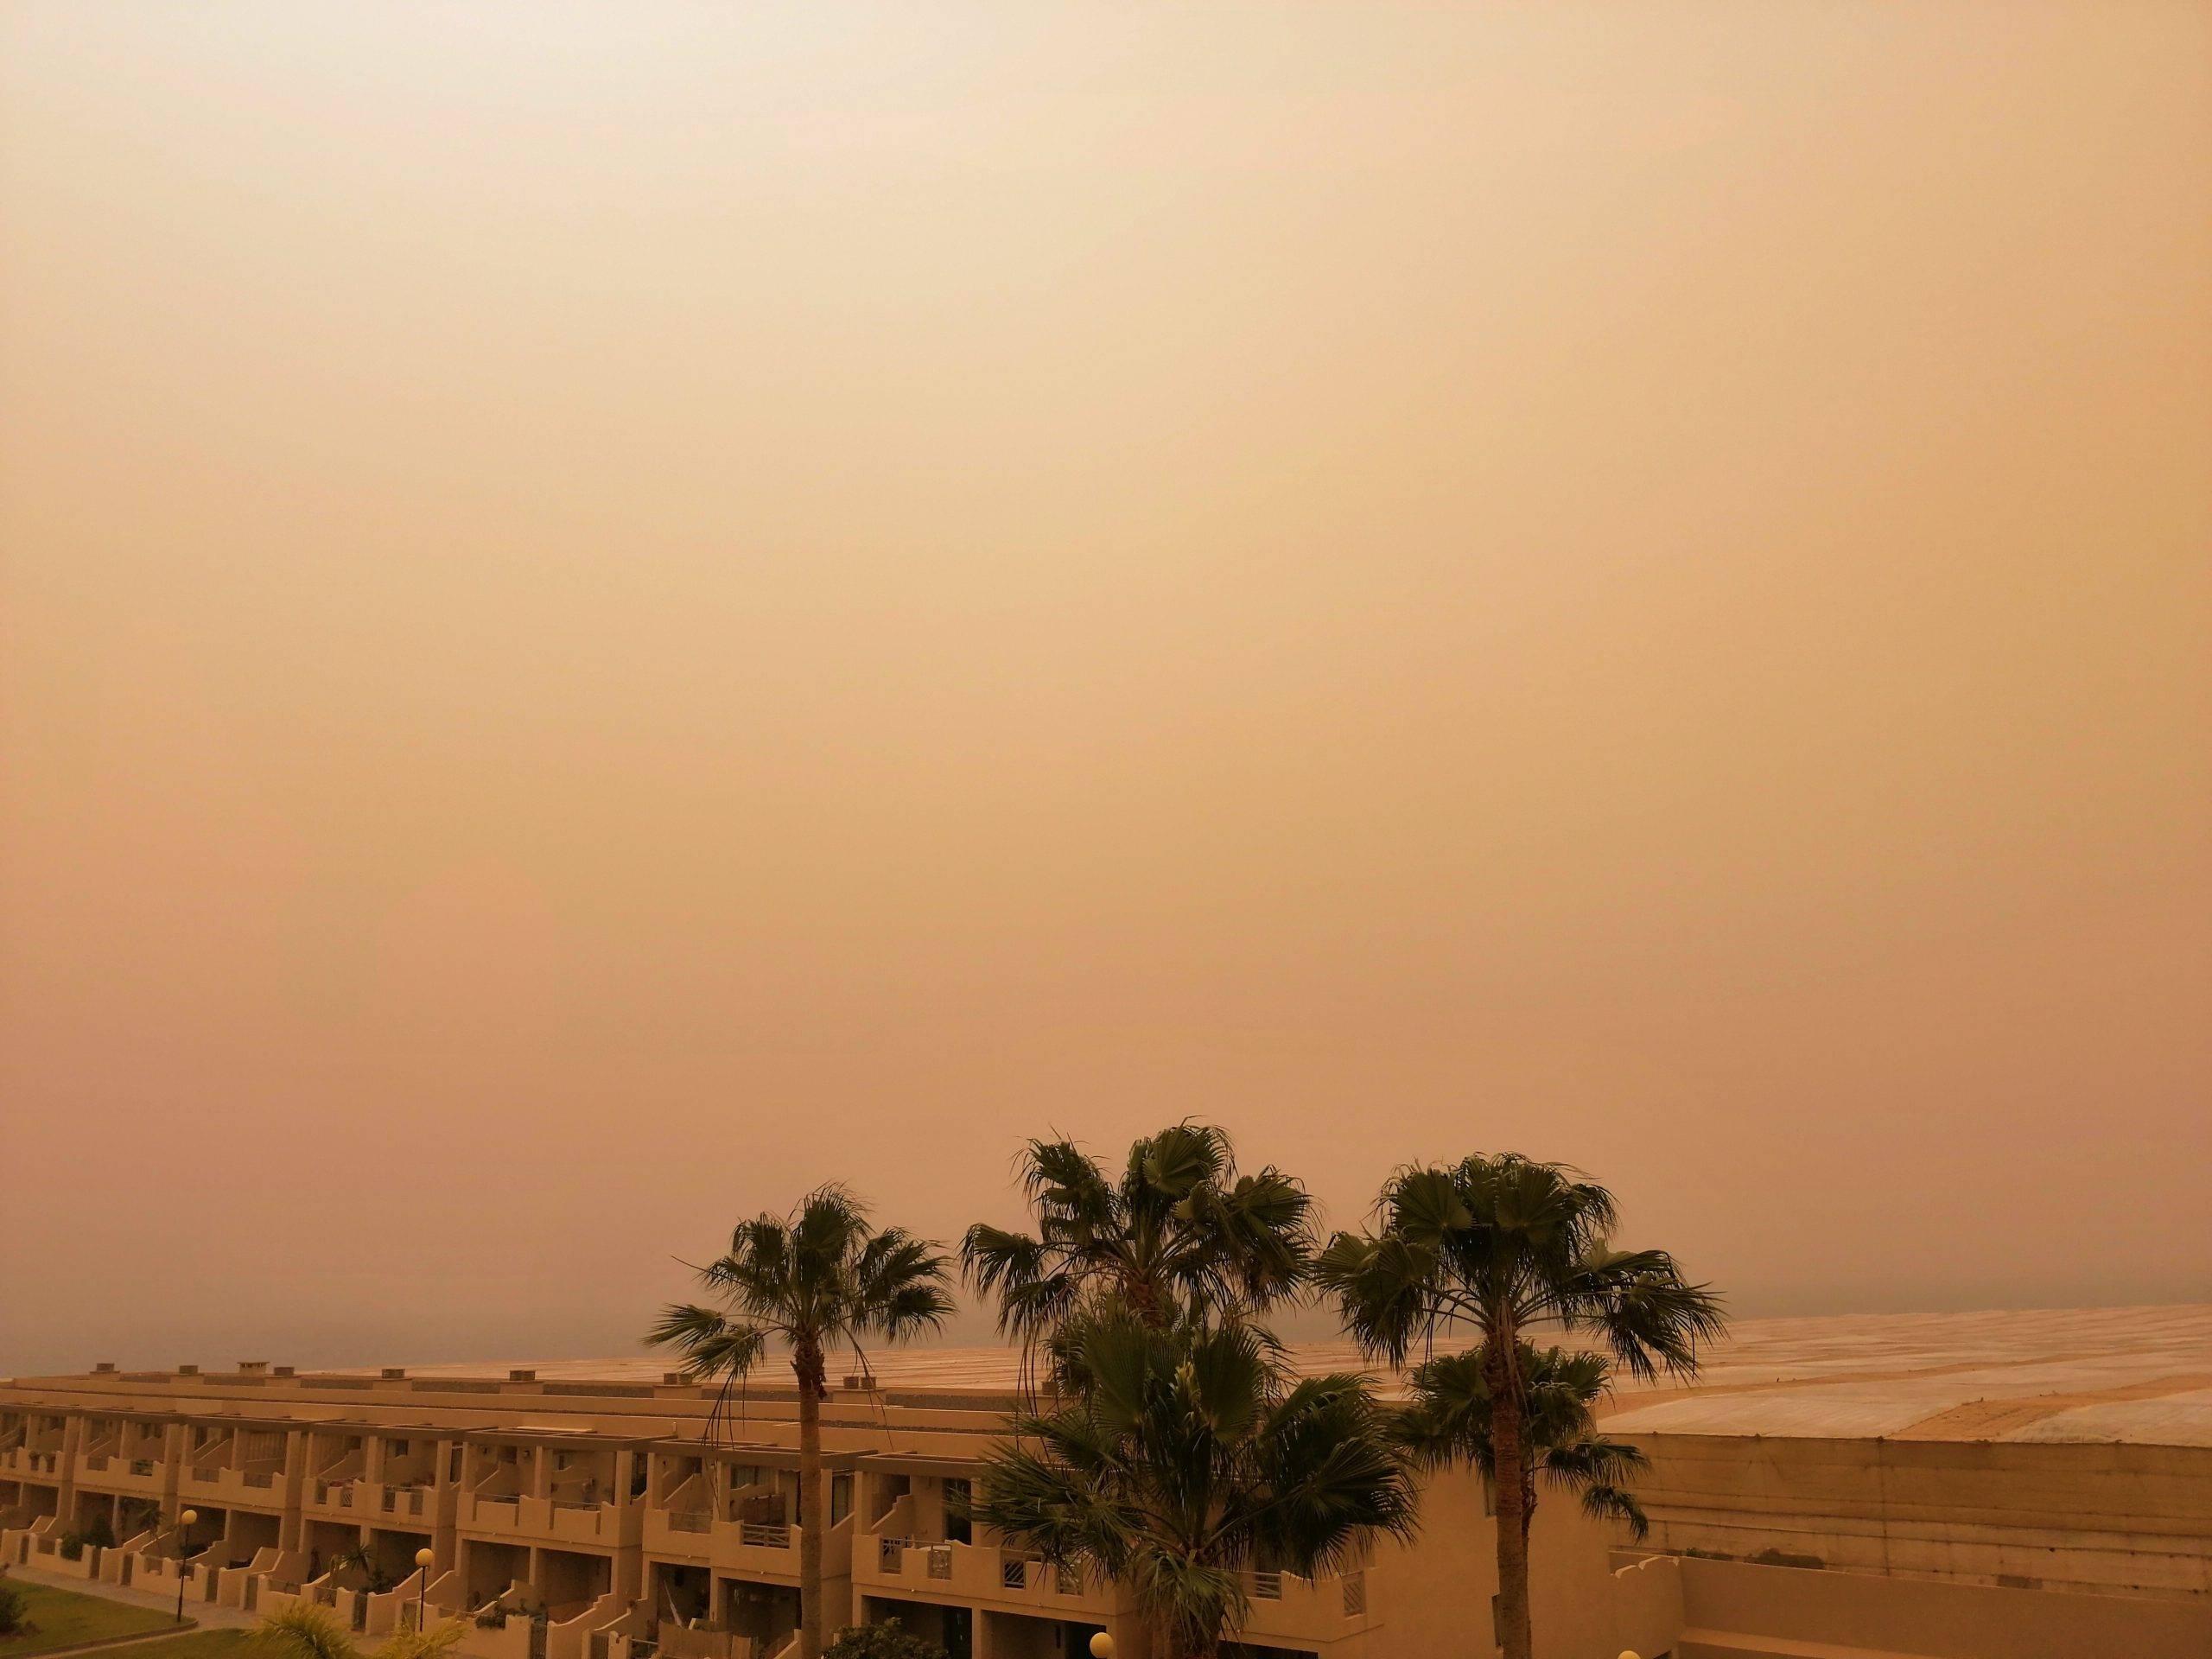 Sandstorms in Canary islands